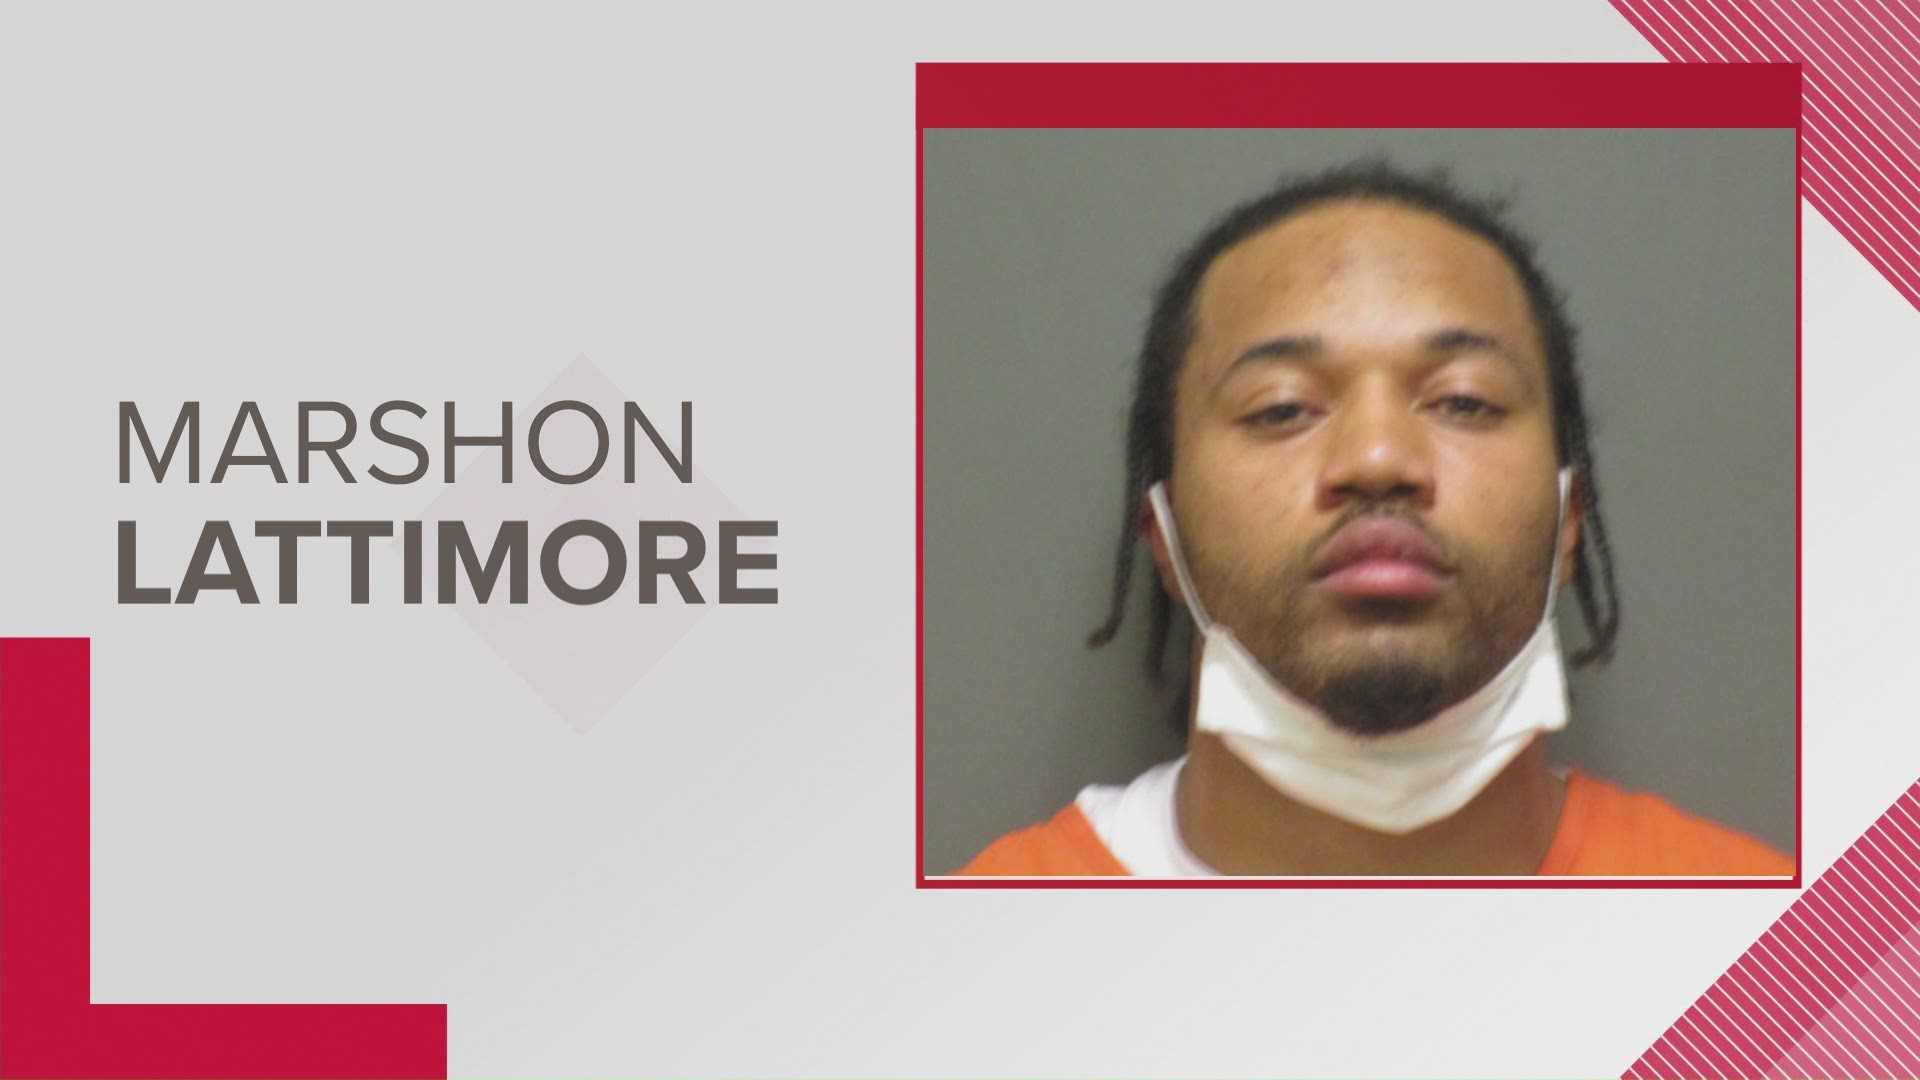 Officers found a stolen handgun in Lattimore's possession, according to Cleveland police.